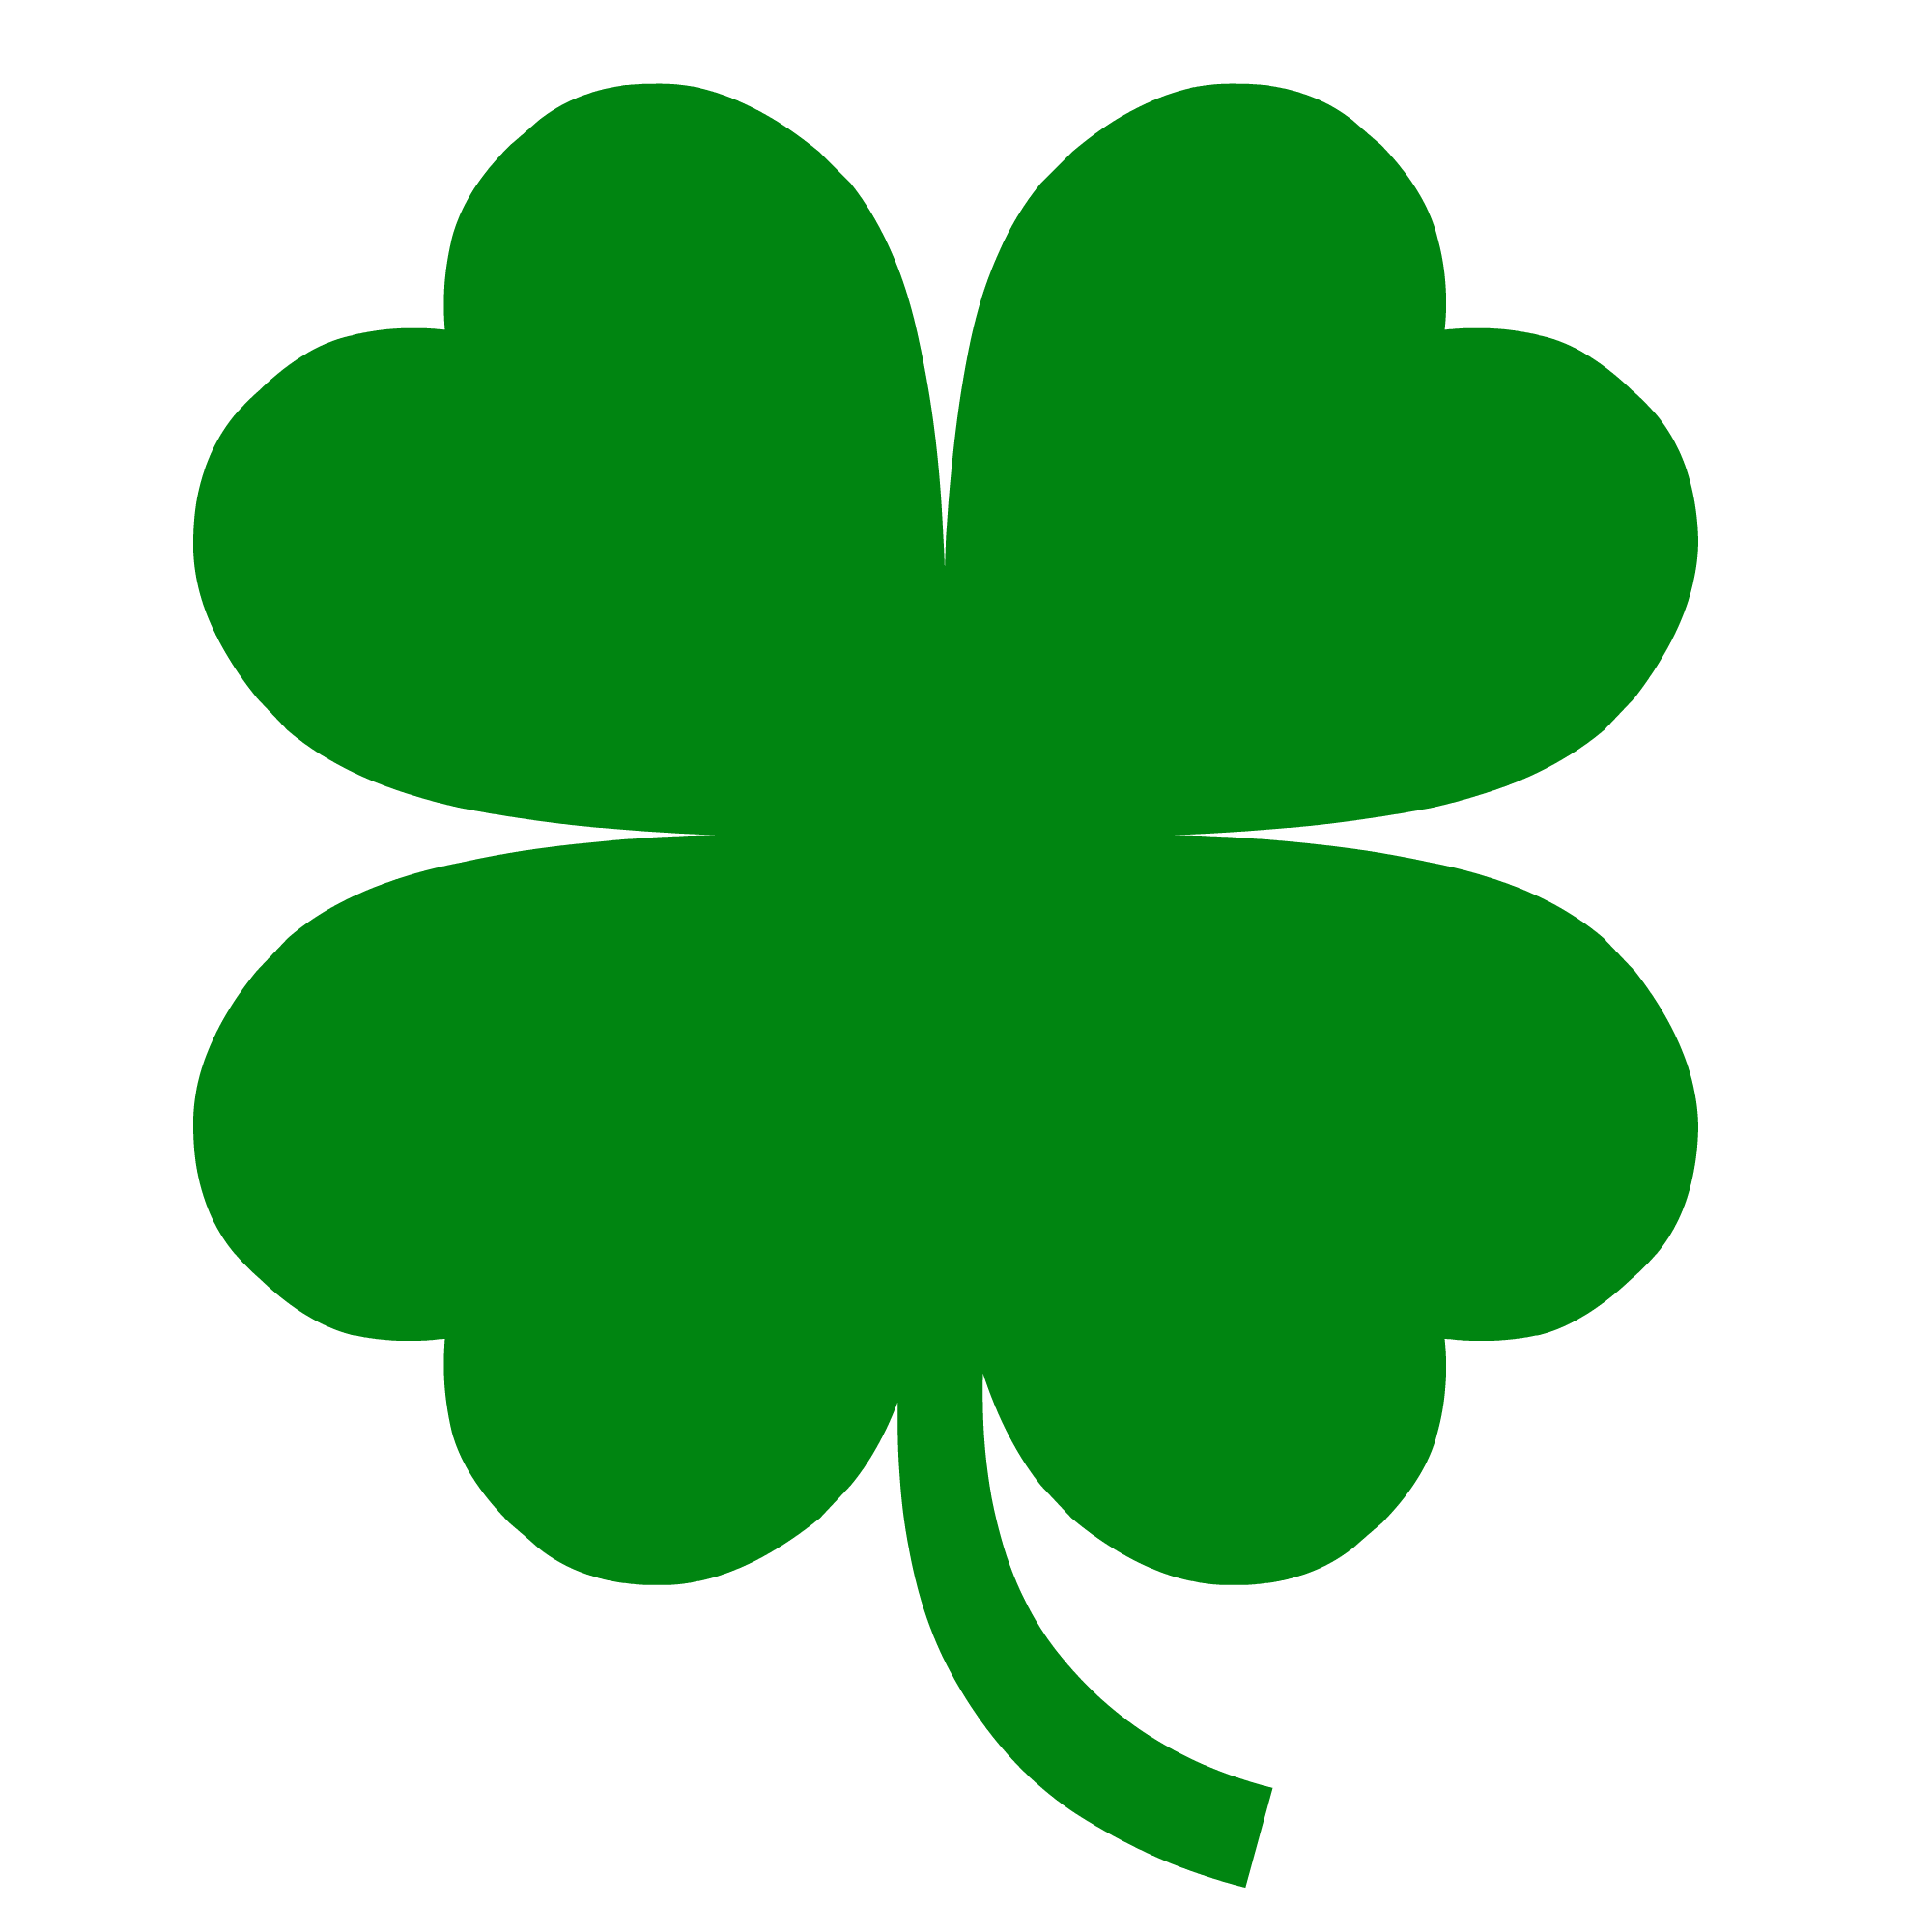 Introducing Images Of Four Leaf Clover Clip Ar #12695 - Unknown ...